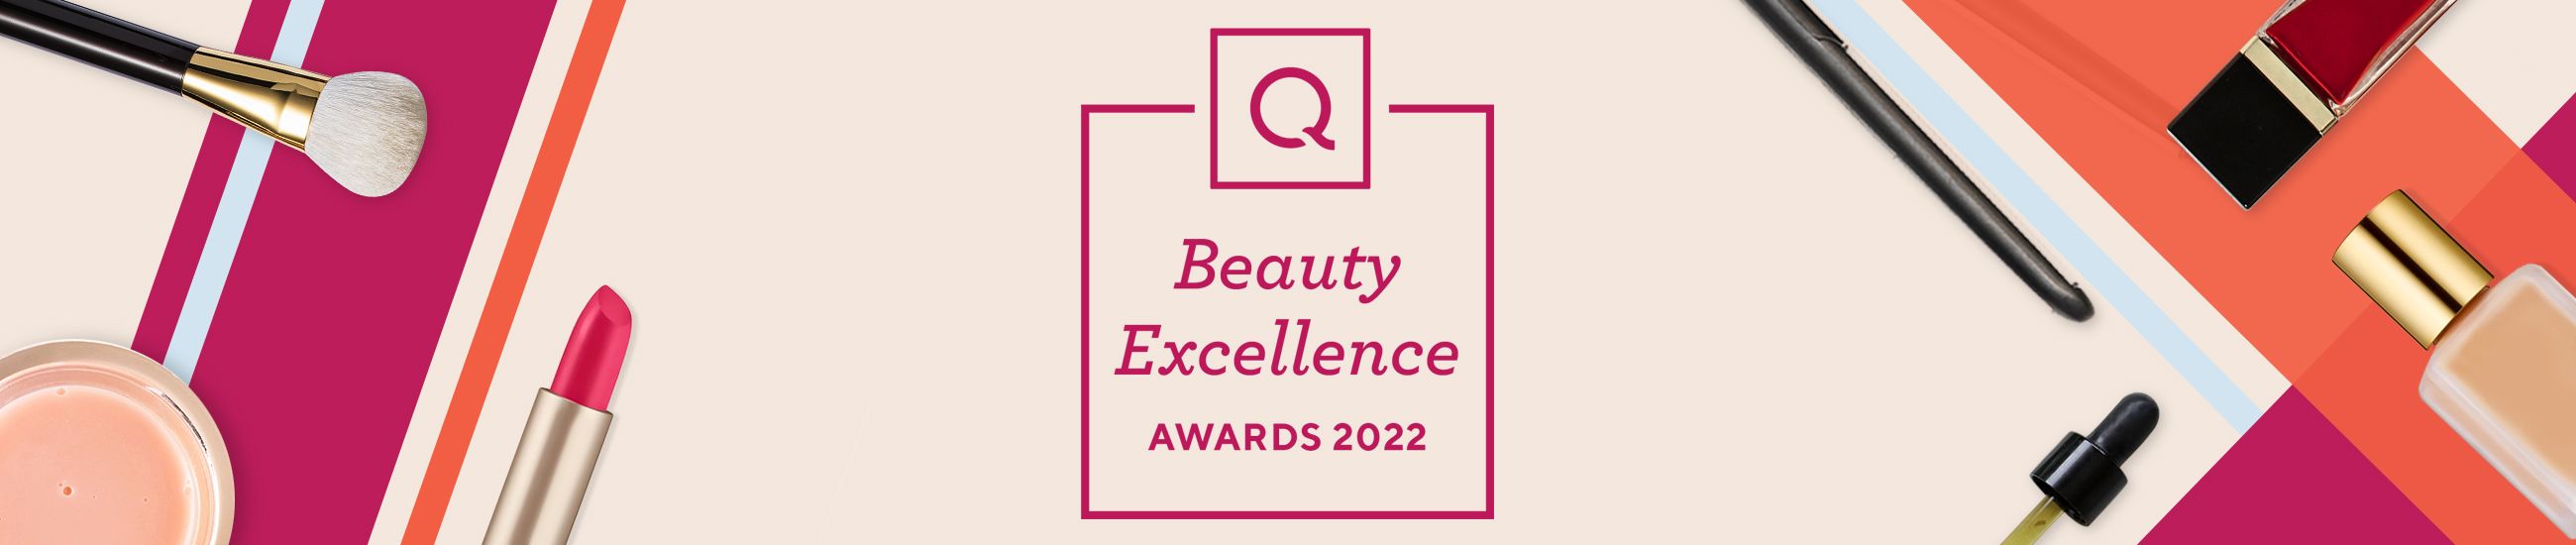 Beauty Excellence Awards 2022